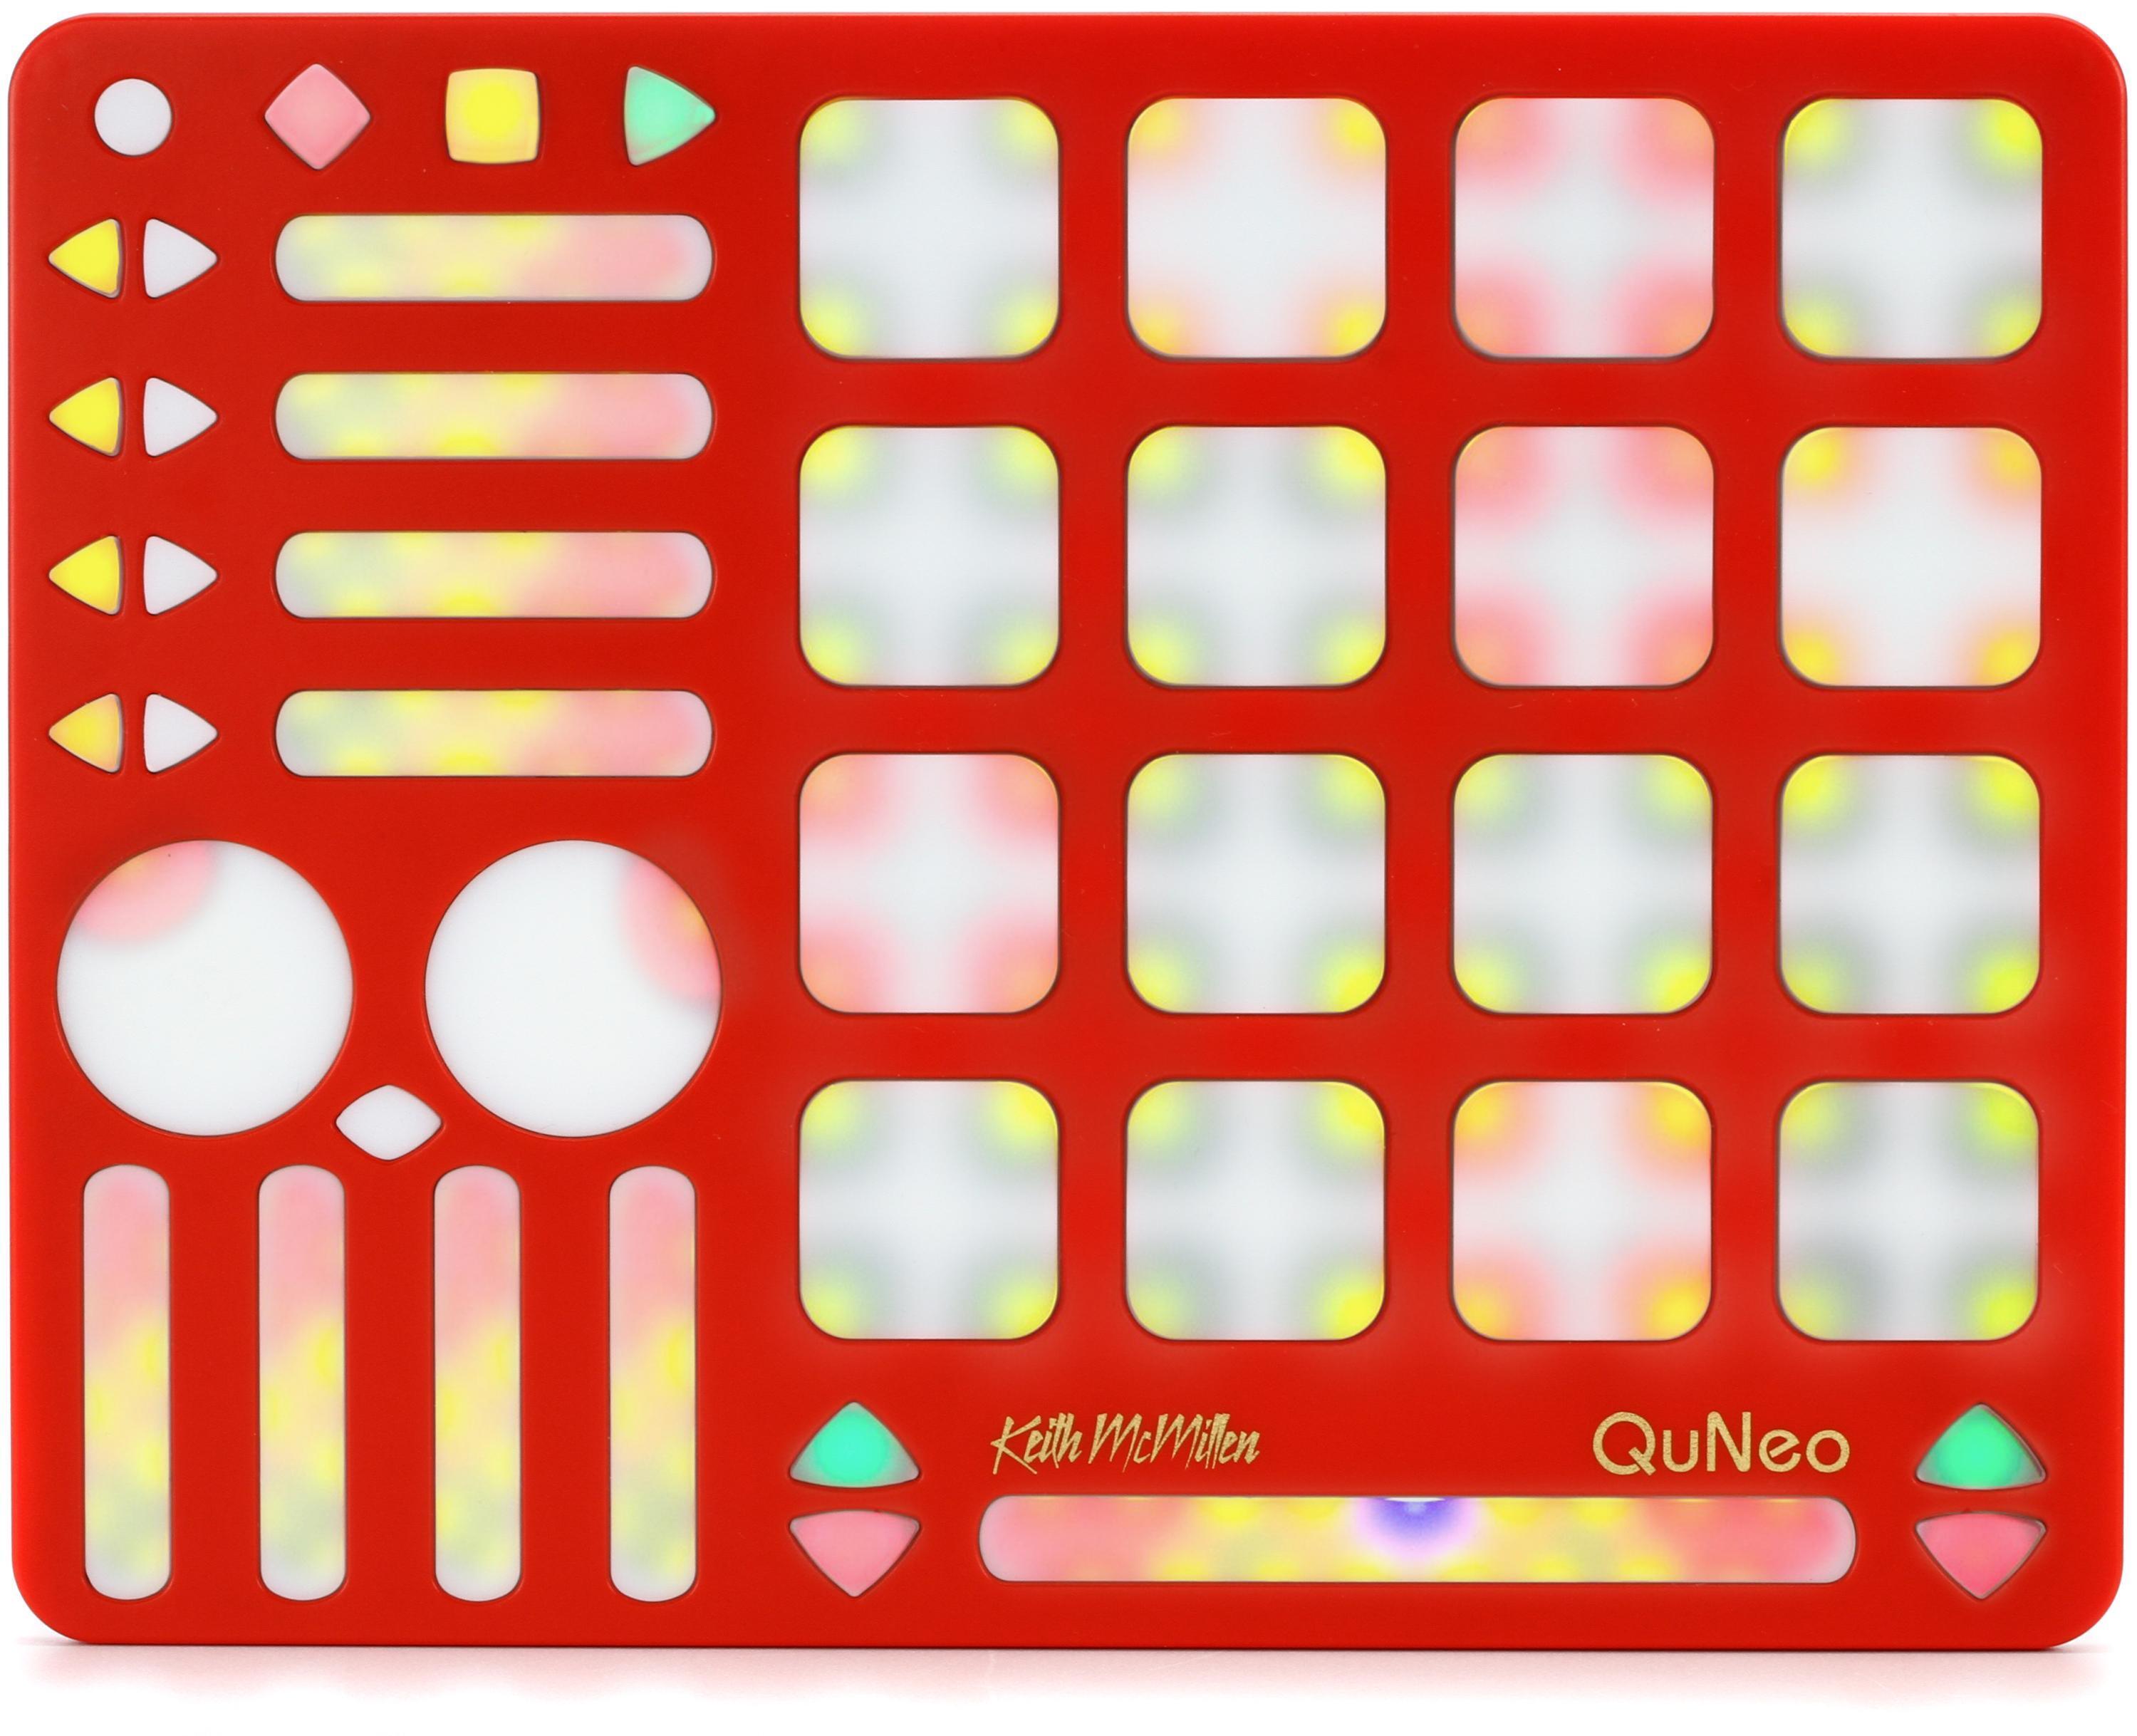 Keith McMillen Instruments QuNeo 3D Pad Controller (Red)